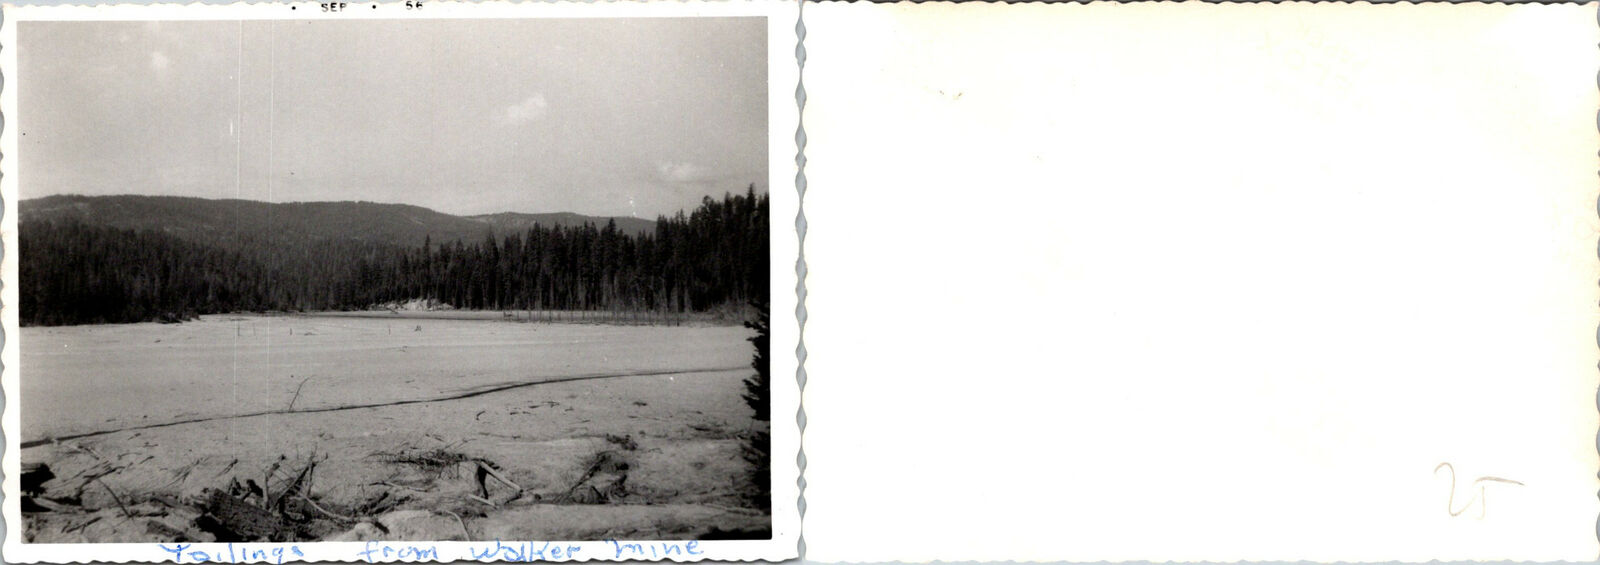 1956 Walker Mine CA California Nature Mountains Abstract FOUND B+W Photo 0111